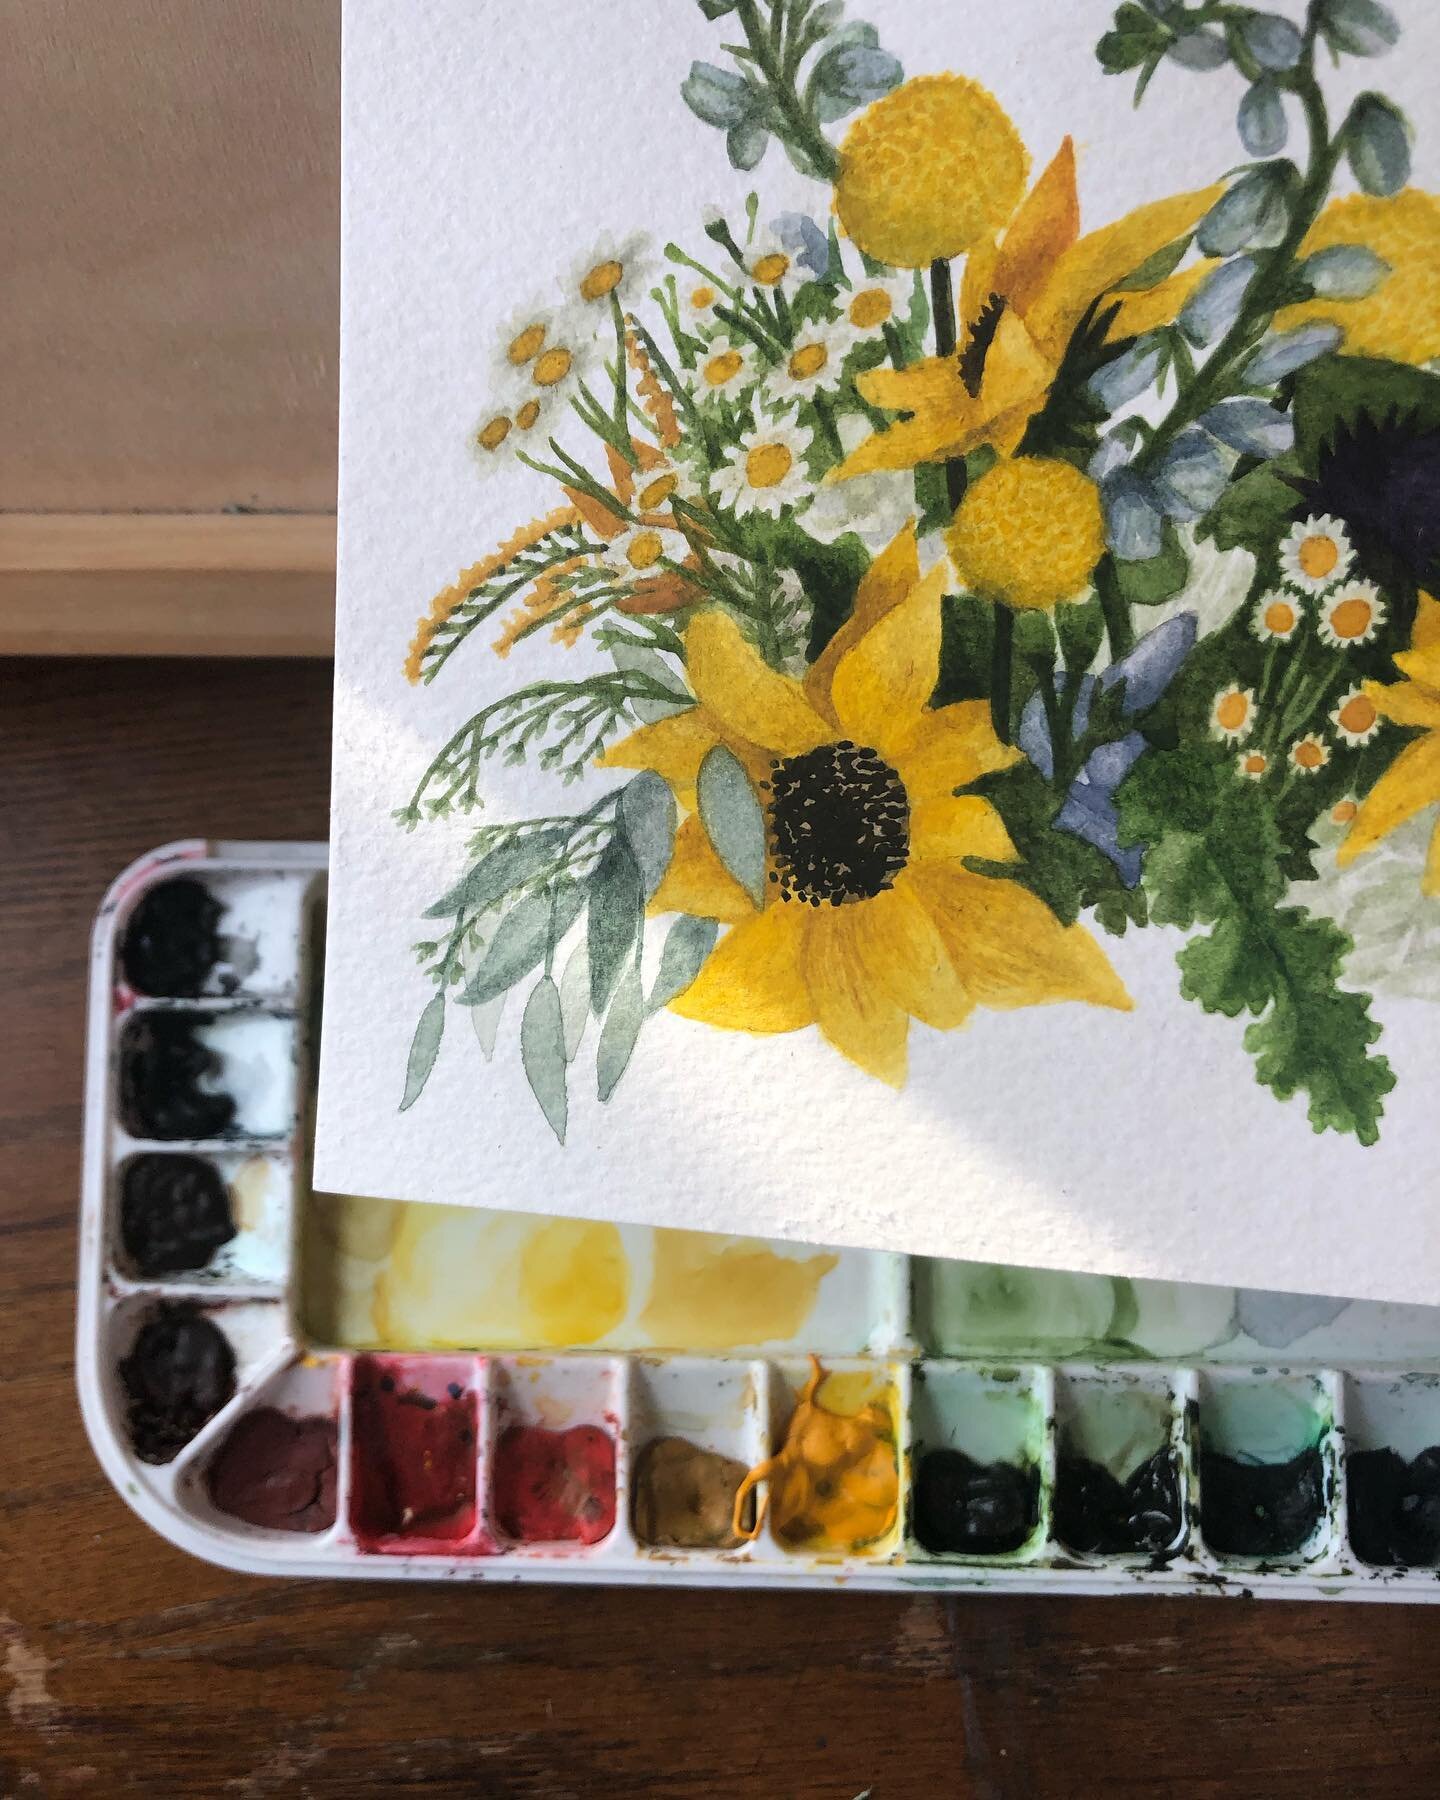 Wedding bouquet paintings &mdash; 
a memorial to the fresh color and texture and feeling of your wedding day, 
and also a uniquely fun project for me, every time, to paint in colors I wouldn&rsquo;t naturally gravitate towards. Here&rsquo;s a yellow/